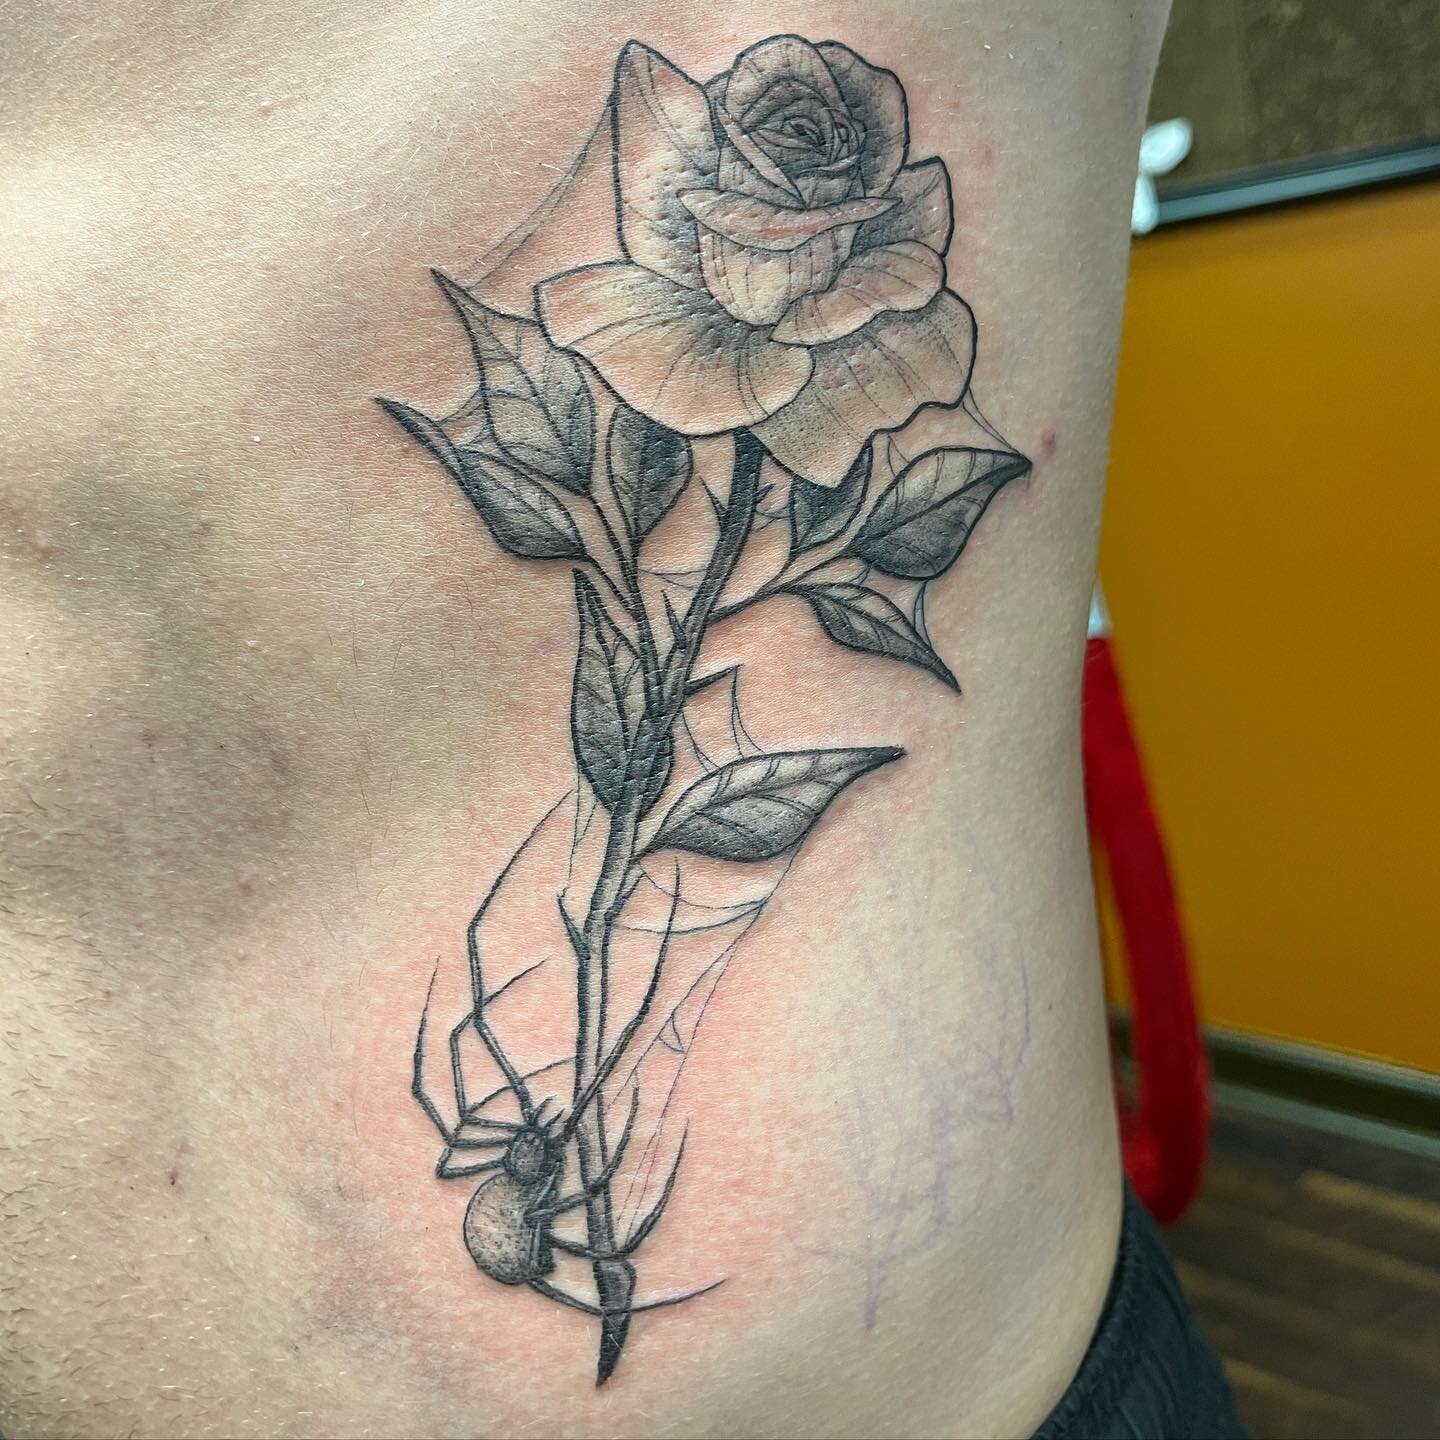 Rose and spider by Ainsley @ainsleyvtattoo ❤️🌹 To book or inquire please email us at gypsykingstattoos@gmail.com
.
.
.
.
 #tattoos #southeastmichigan #southeastmi #mitattooartist #detroittattooartist #MItattoo #tattooshop #flowertattoo #spidertattoo